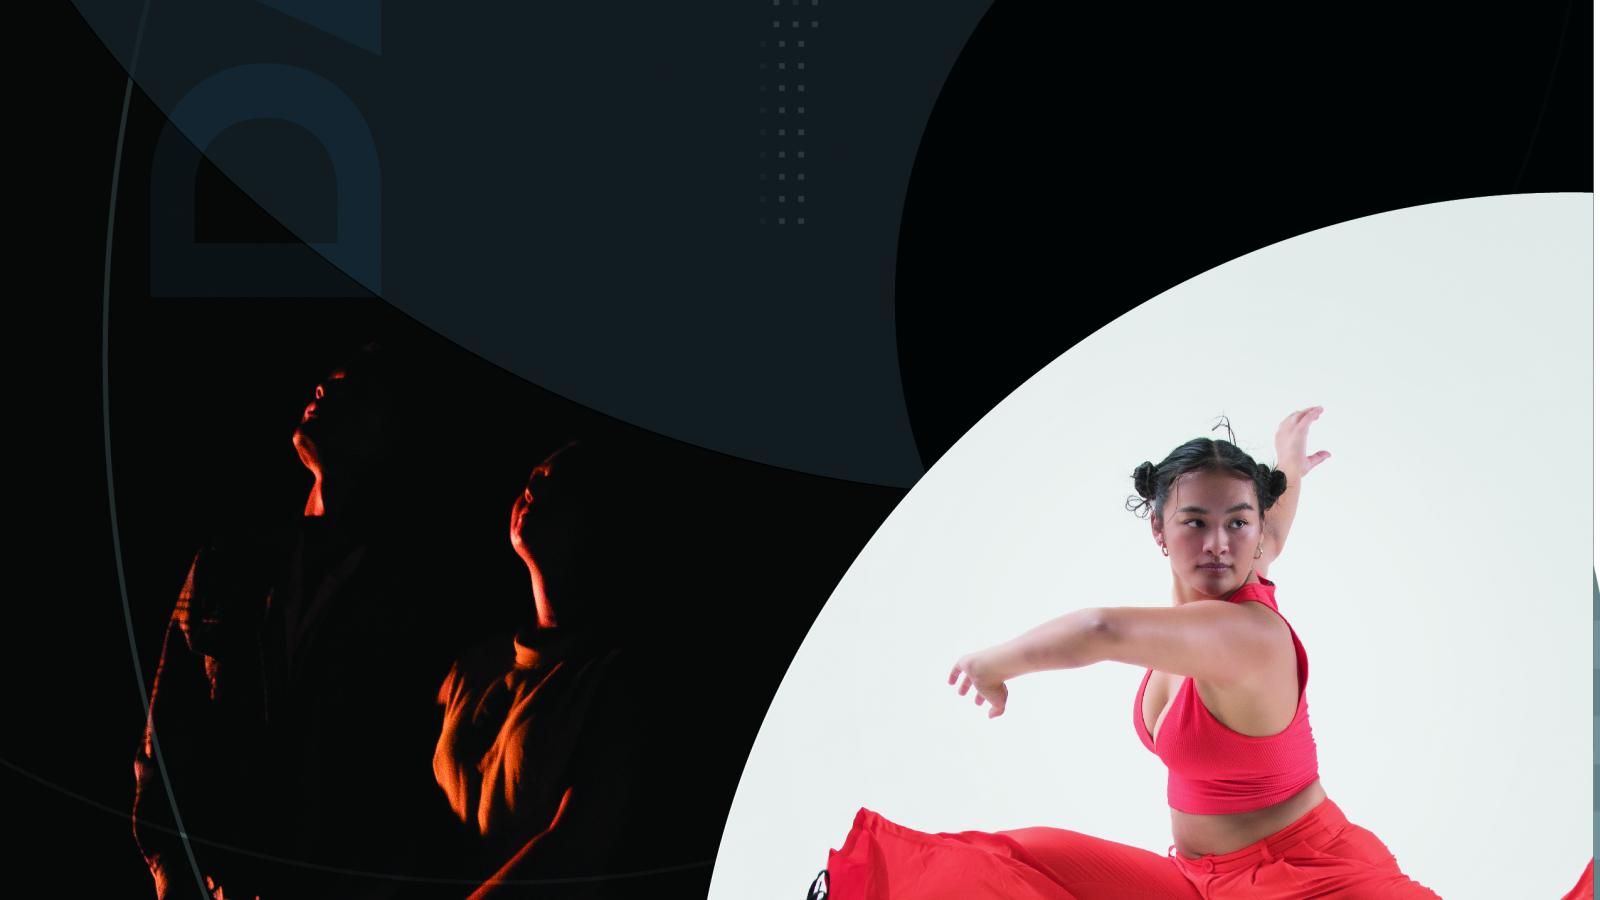 Layered graphic with dark circles and faded green text that reads DANCE. A duet is silhouetted in orange light and a dancer in an orange outfit leaps agains a white backdrop.